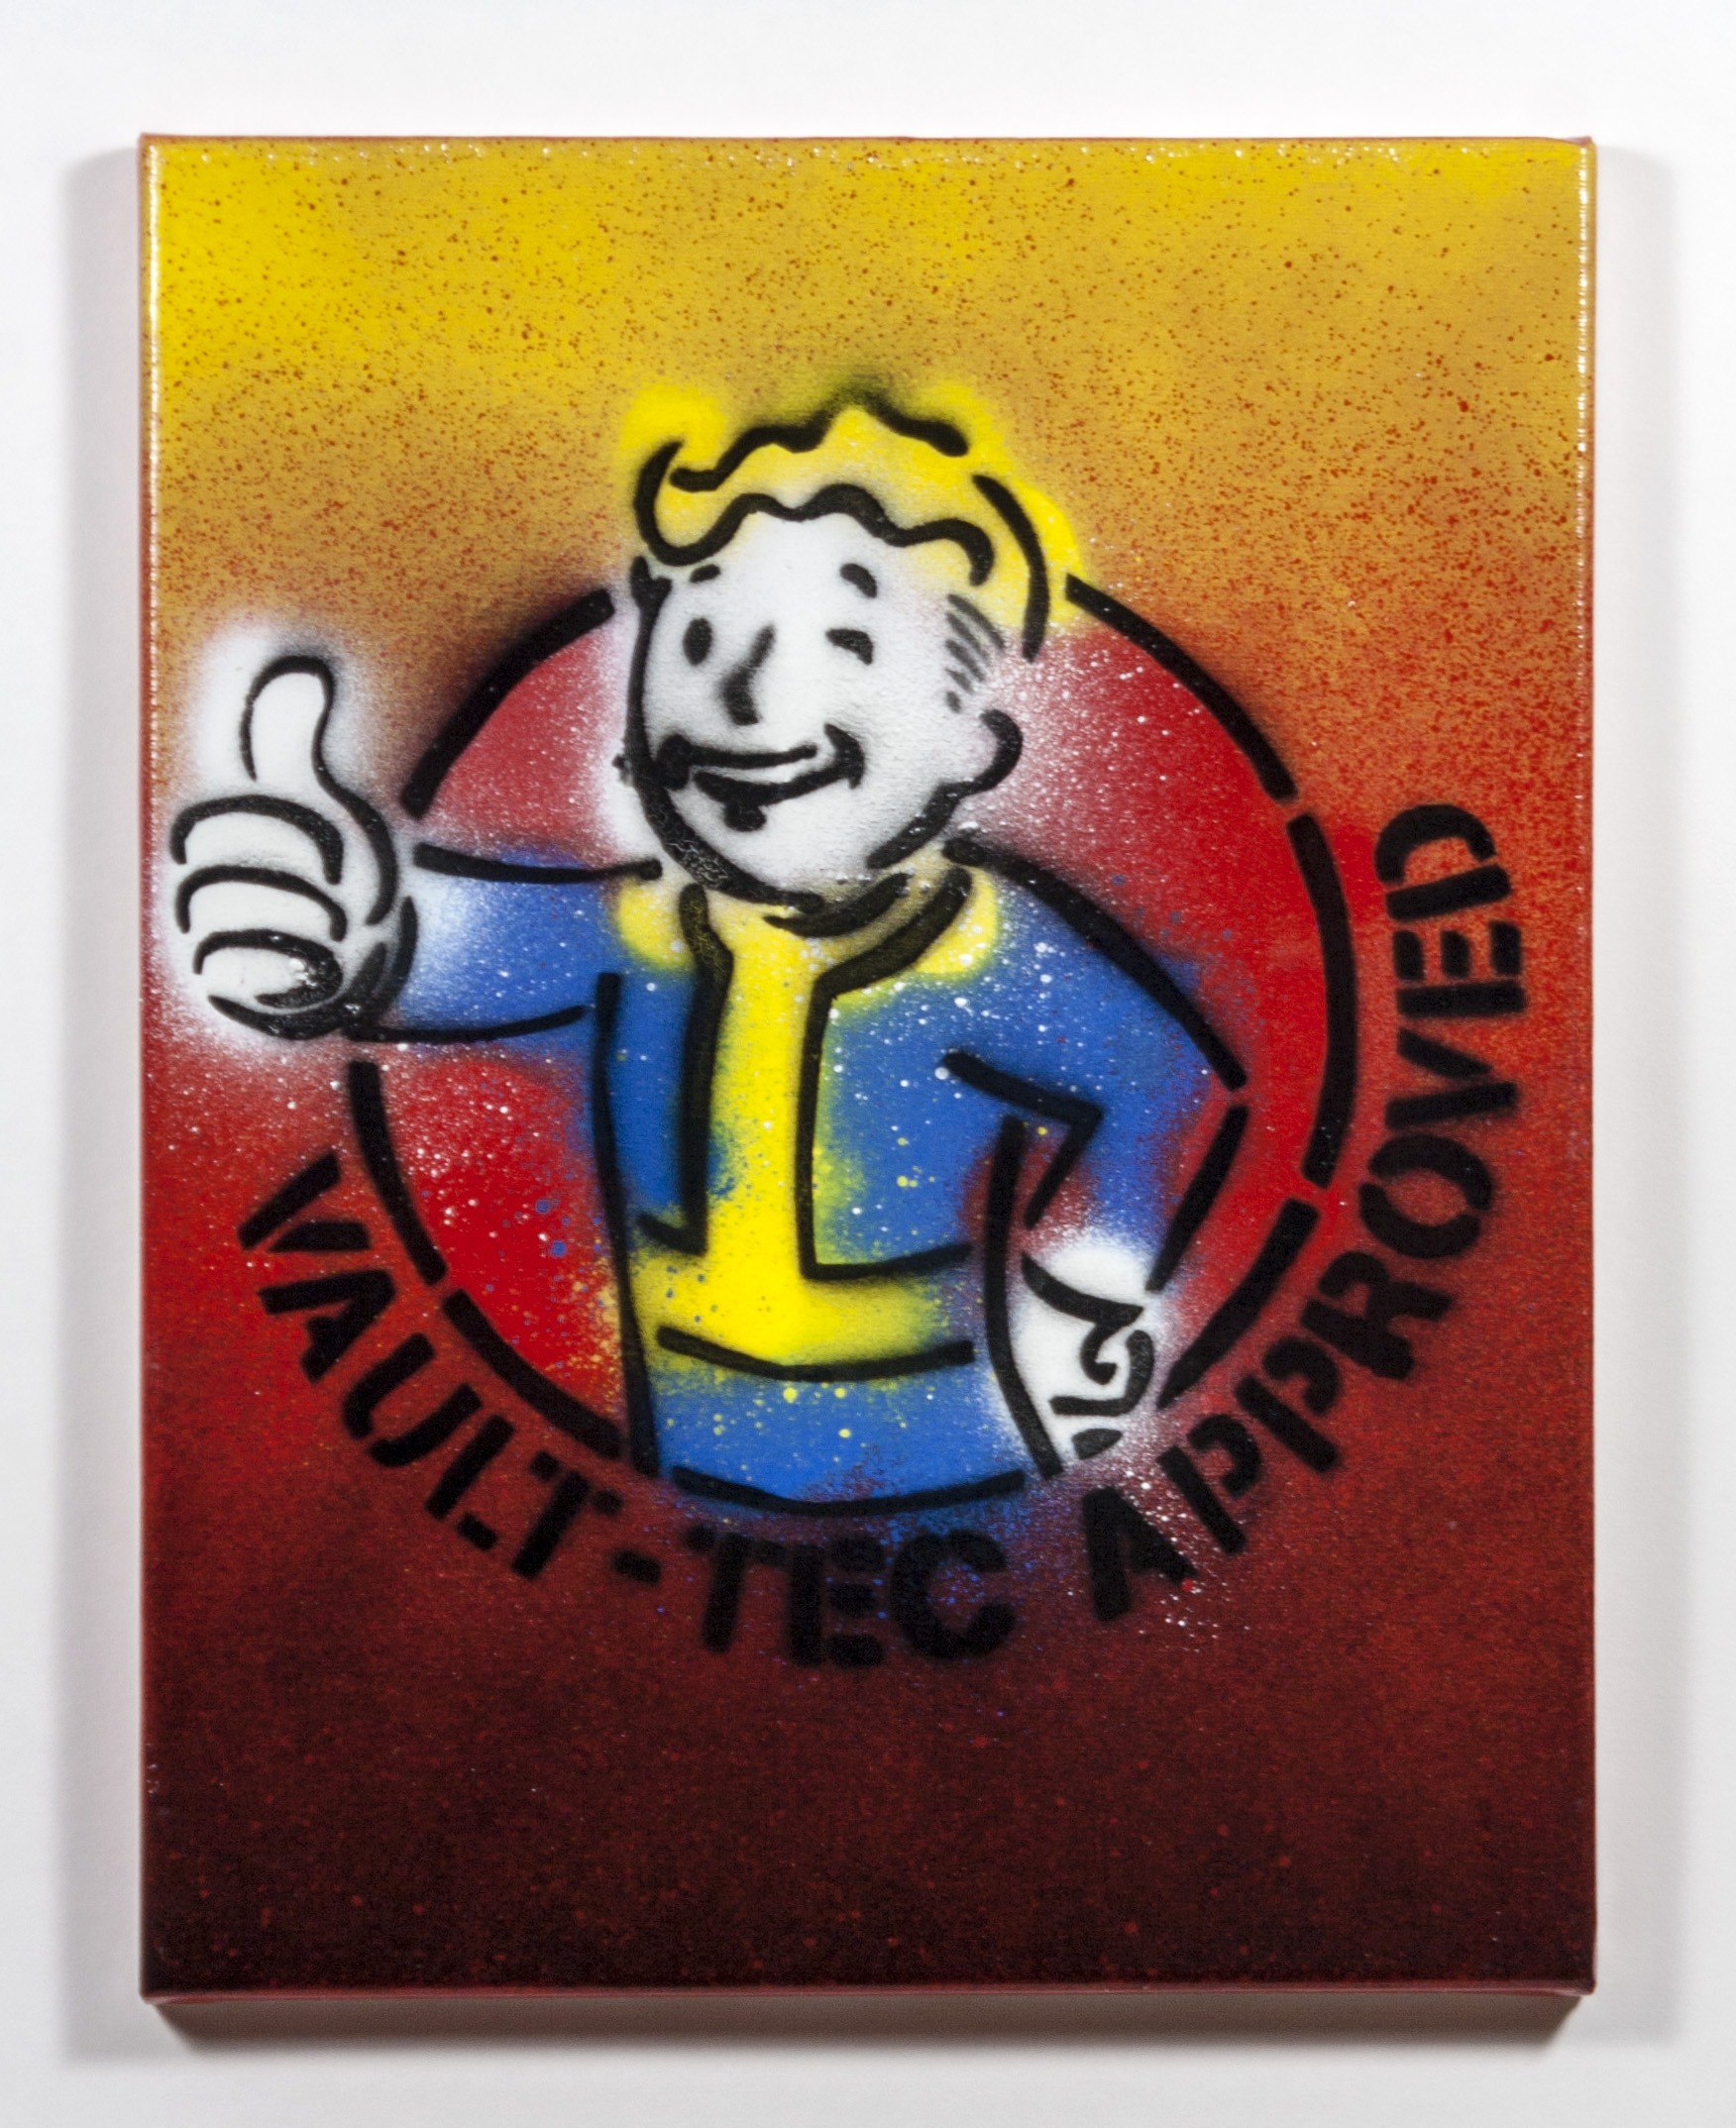 Vault-Tec Approved - 2017